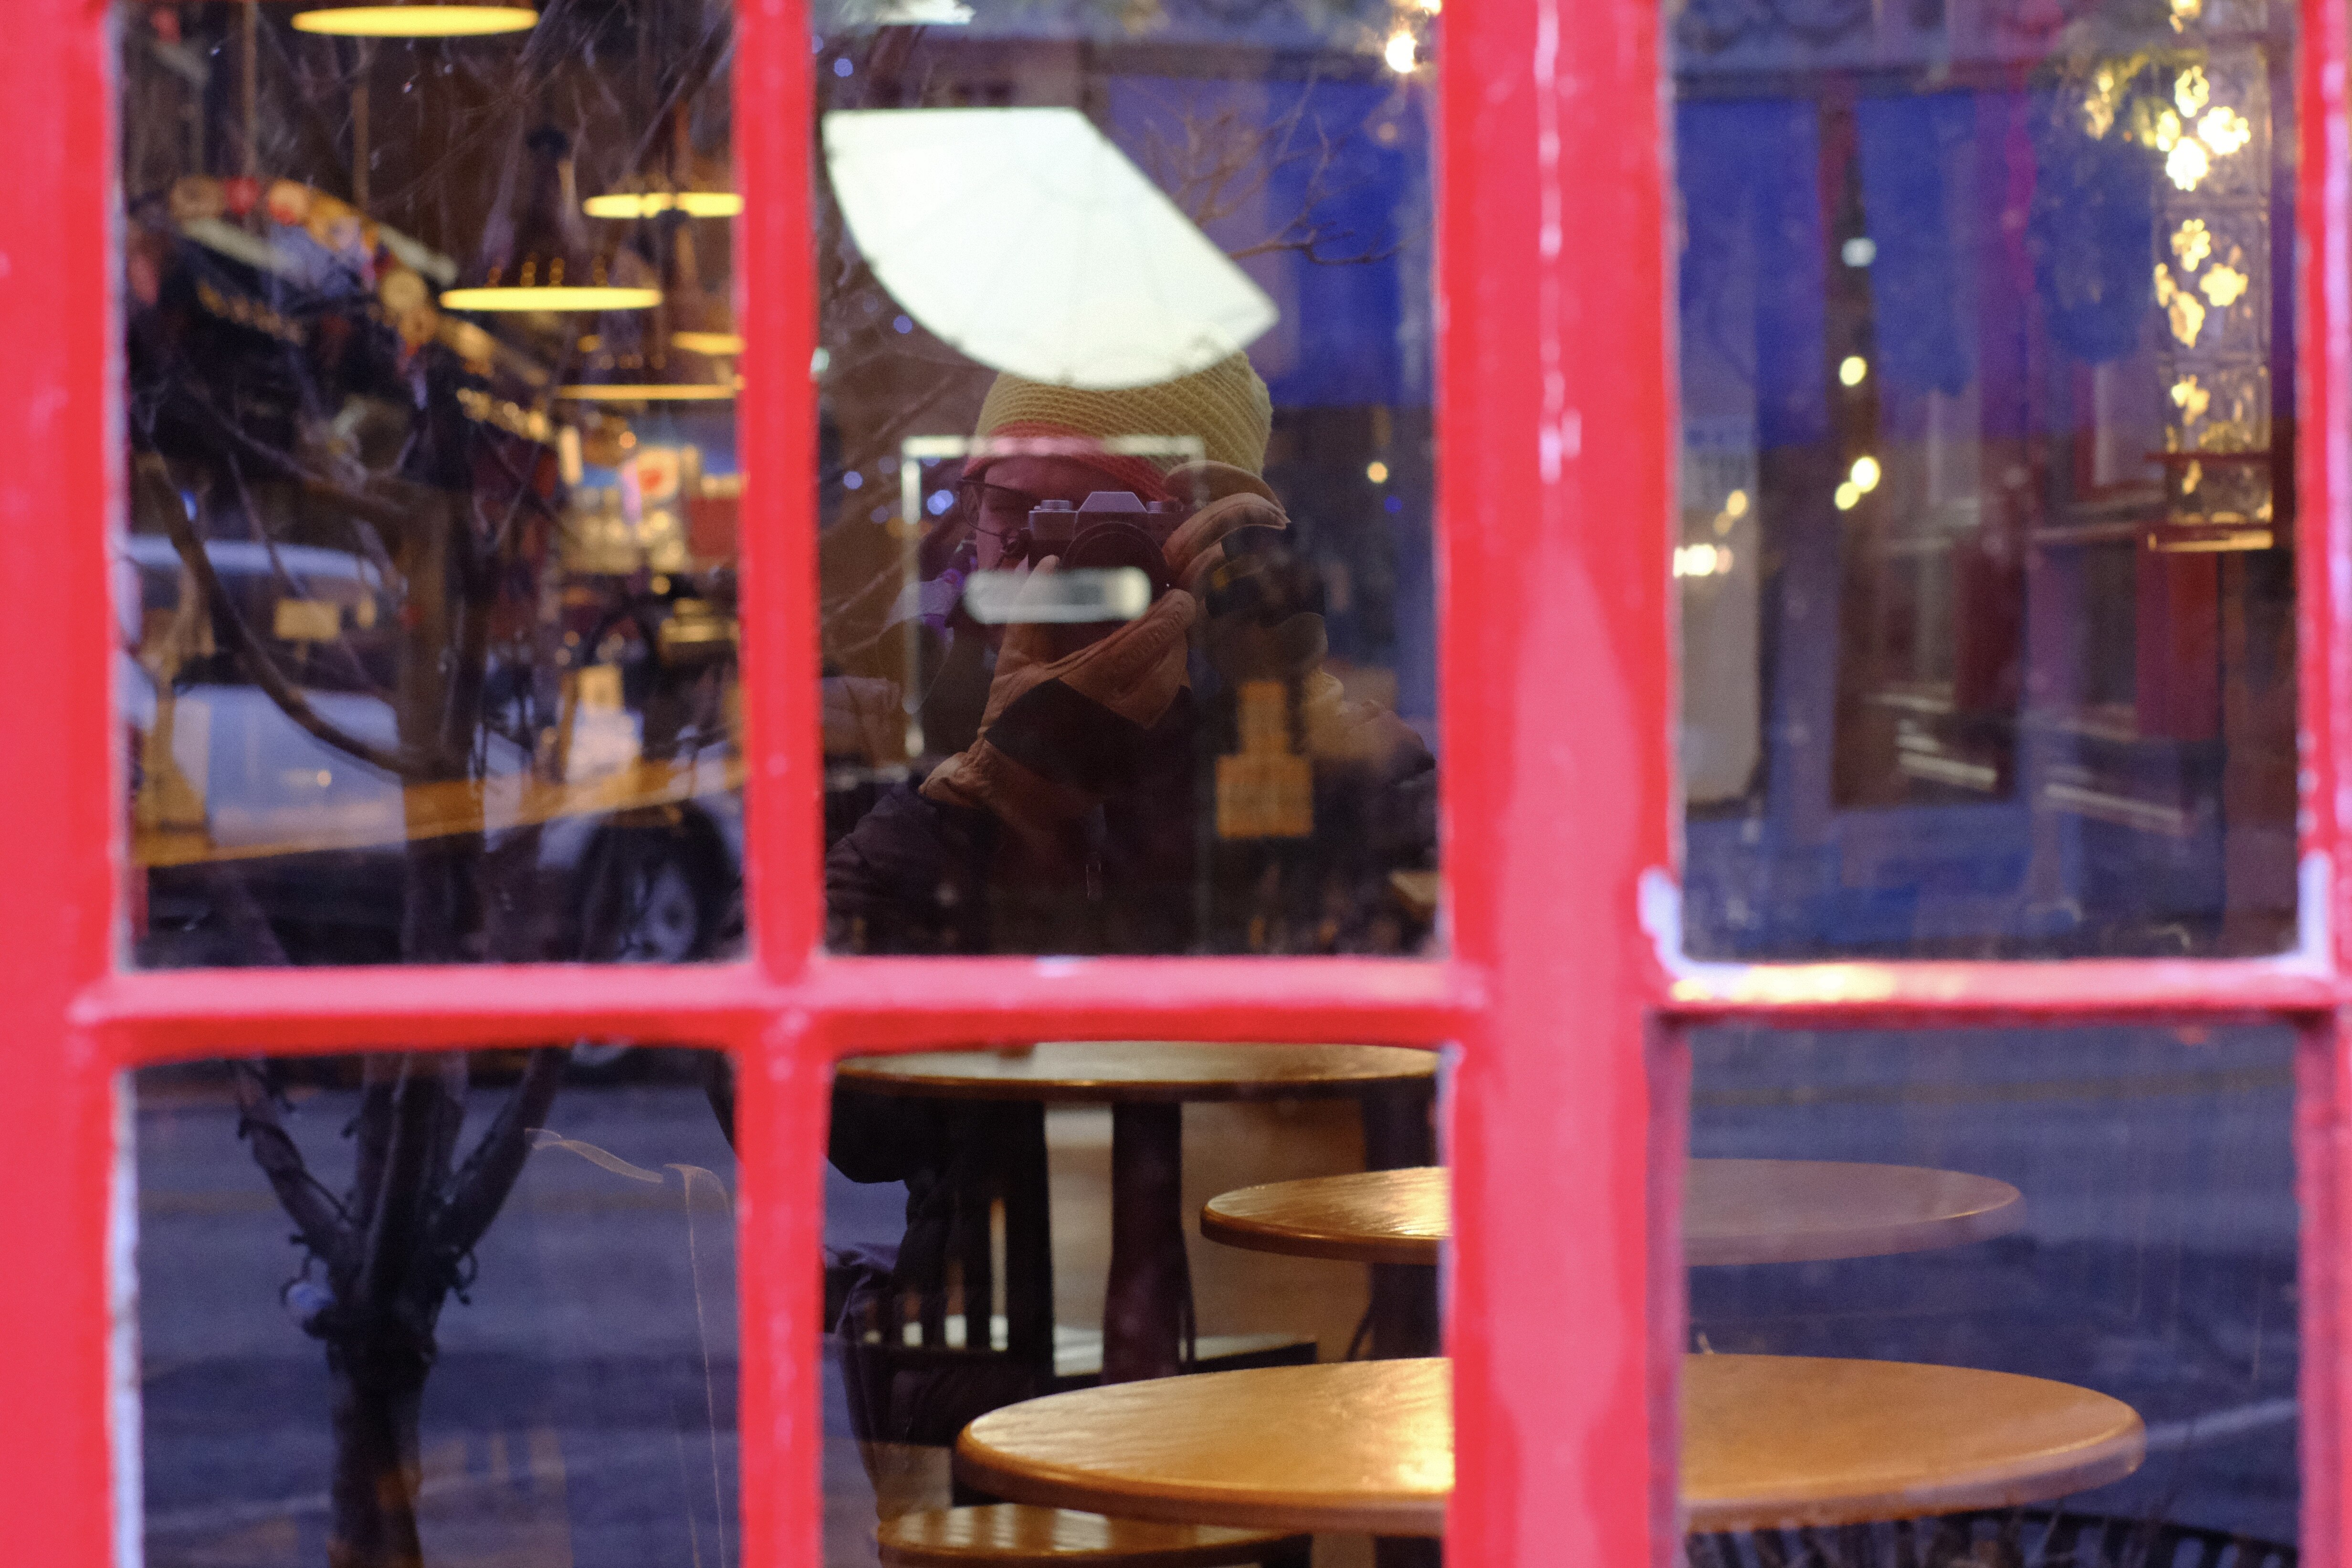 A set of bright red windowpanes frame a reflection in the glass of a photographer with a silver camera to hit face. He is wearing a yellow knit hat and yellow leather gloves. Behind the glass several chairs and a long bar counter are visible in warm indoor light.